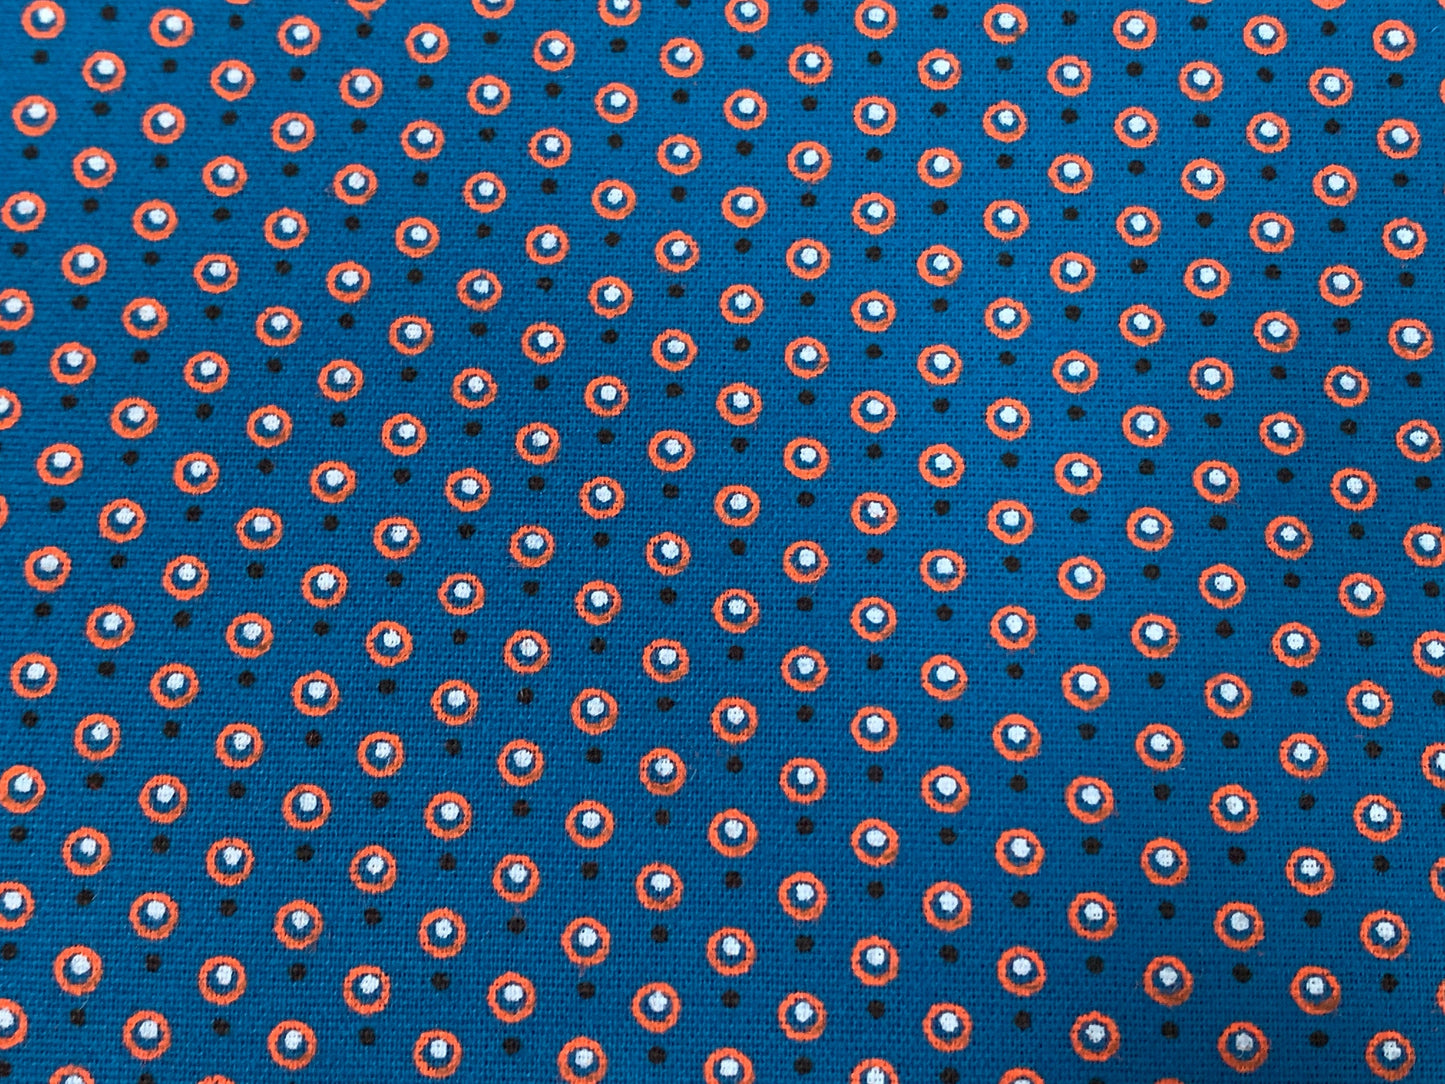 South African Shweshwe Fabric by the YARD. Da Gama Three Cats Turquoise & Orange Circled Dots. 100% Cotton Print for Quilts, Apparel, Décor.